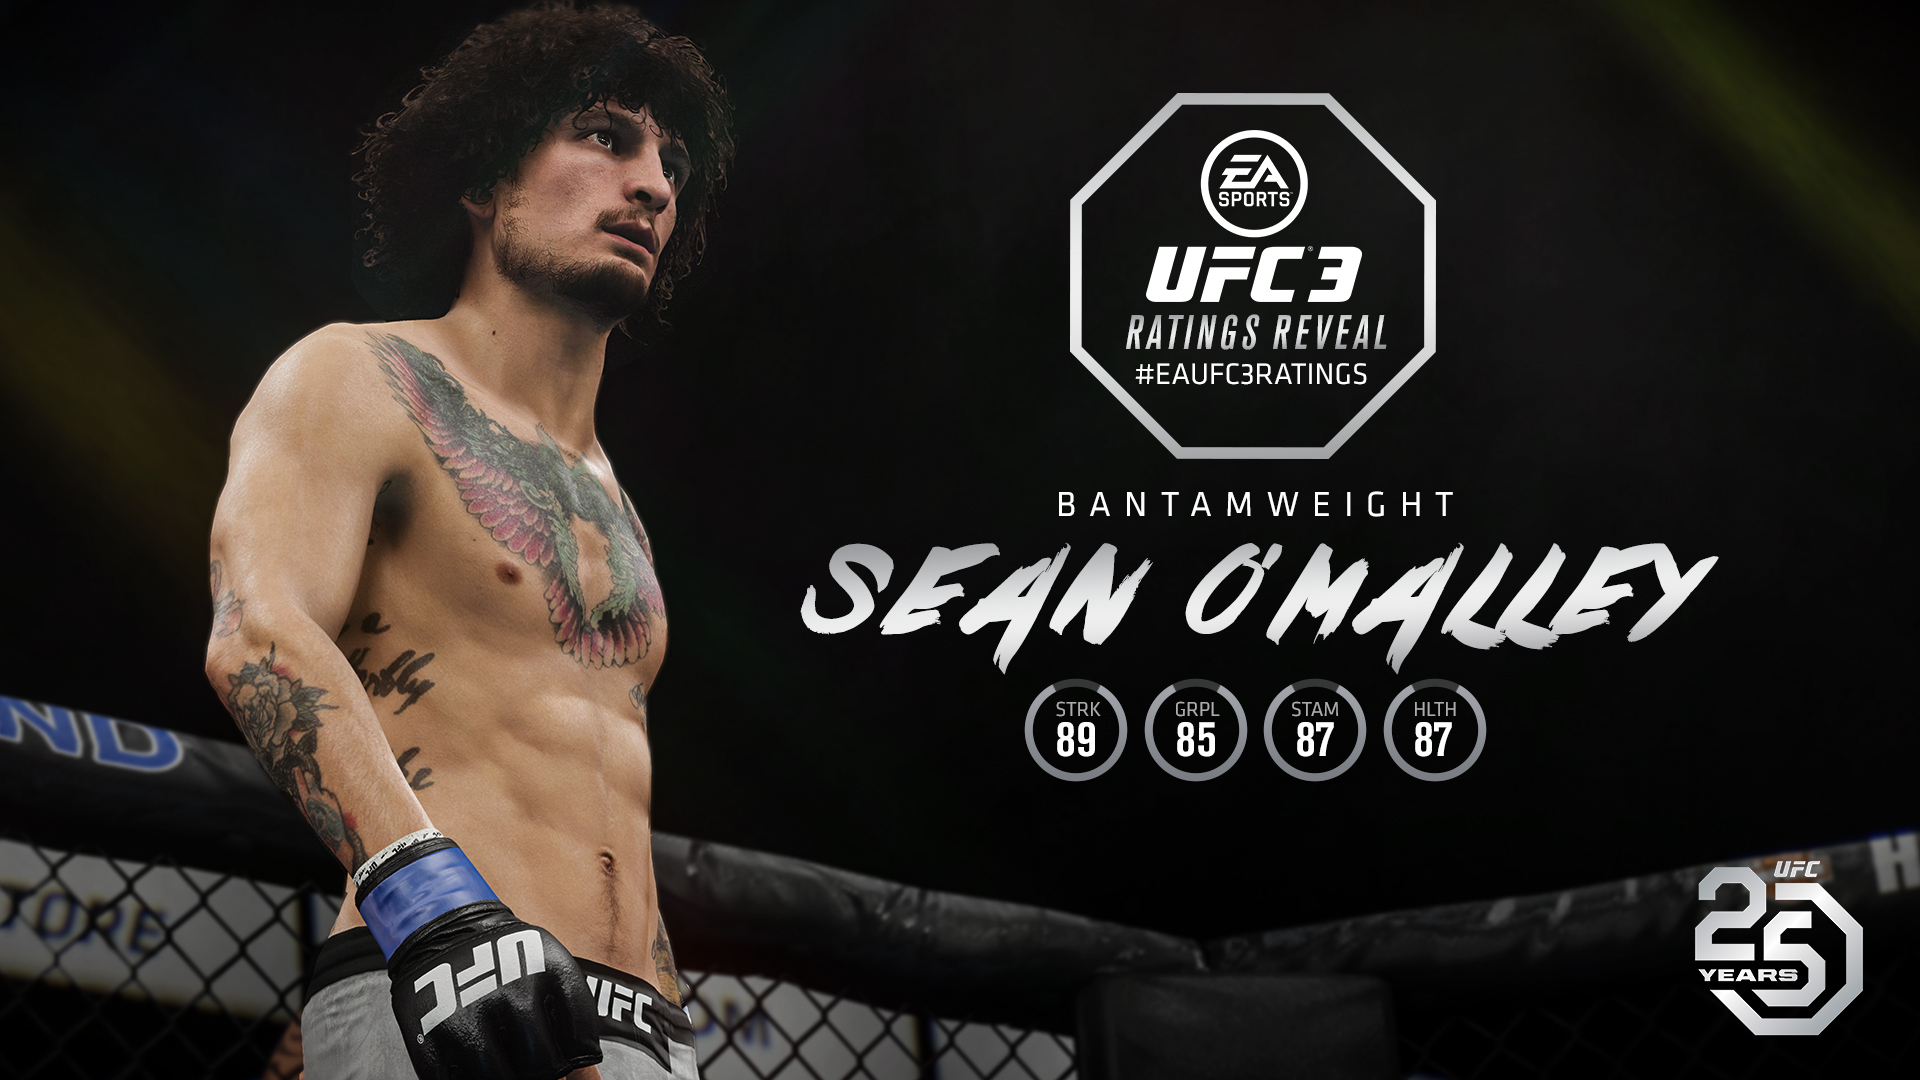 ea sports ufc 3 new fighters 2019